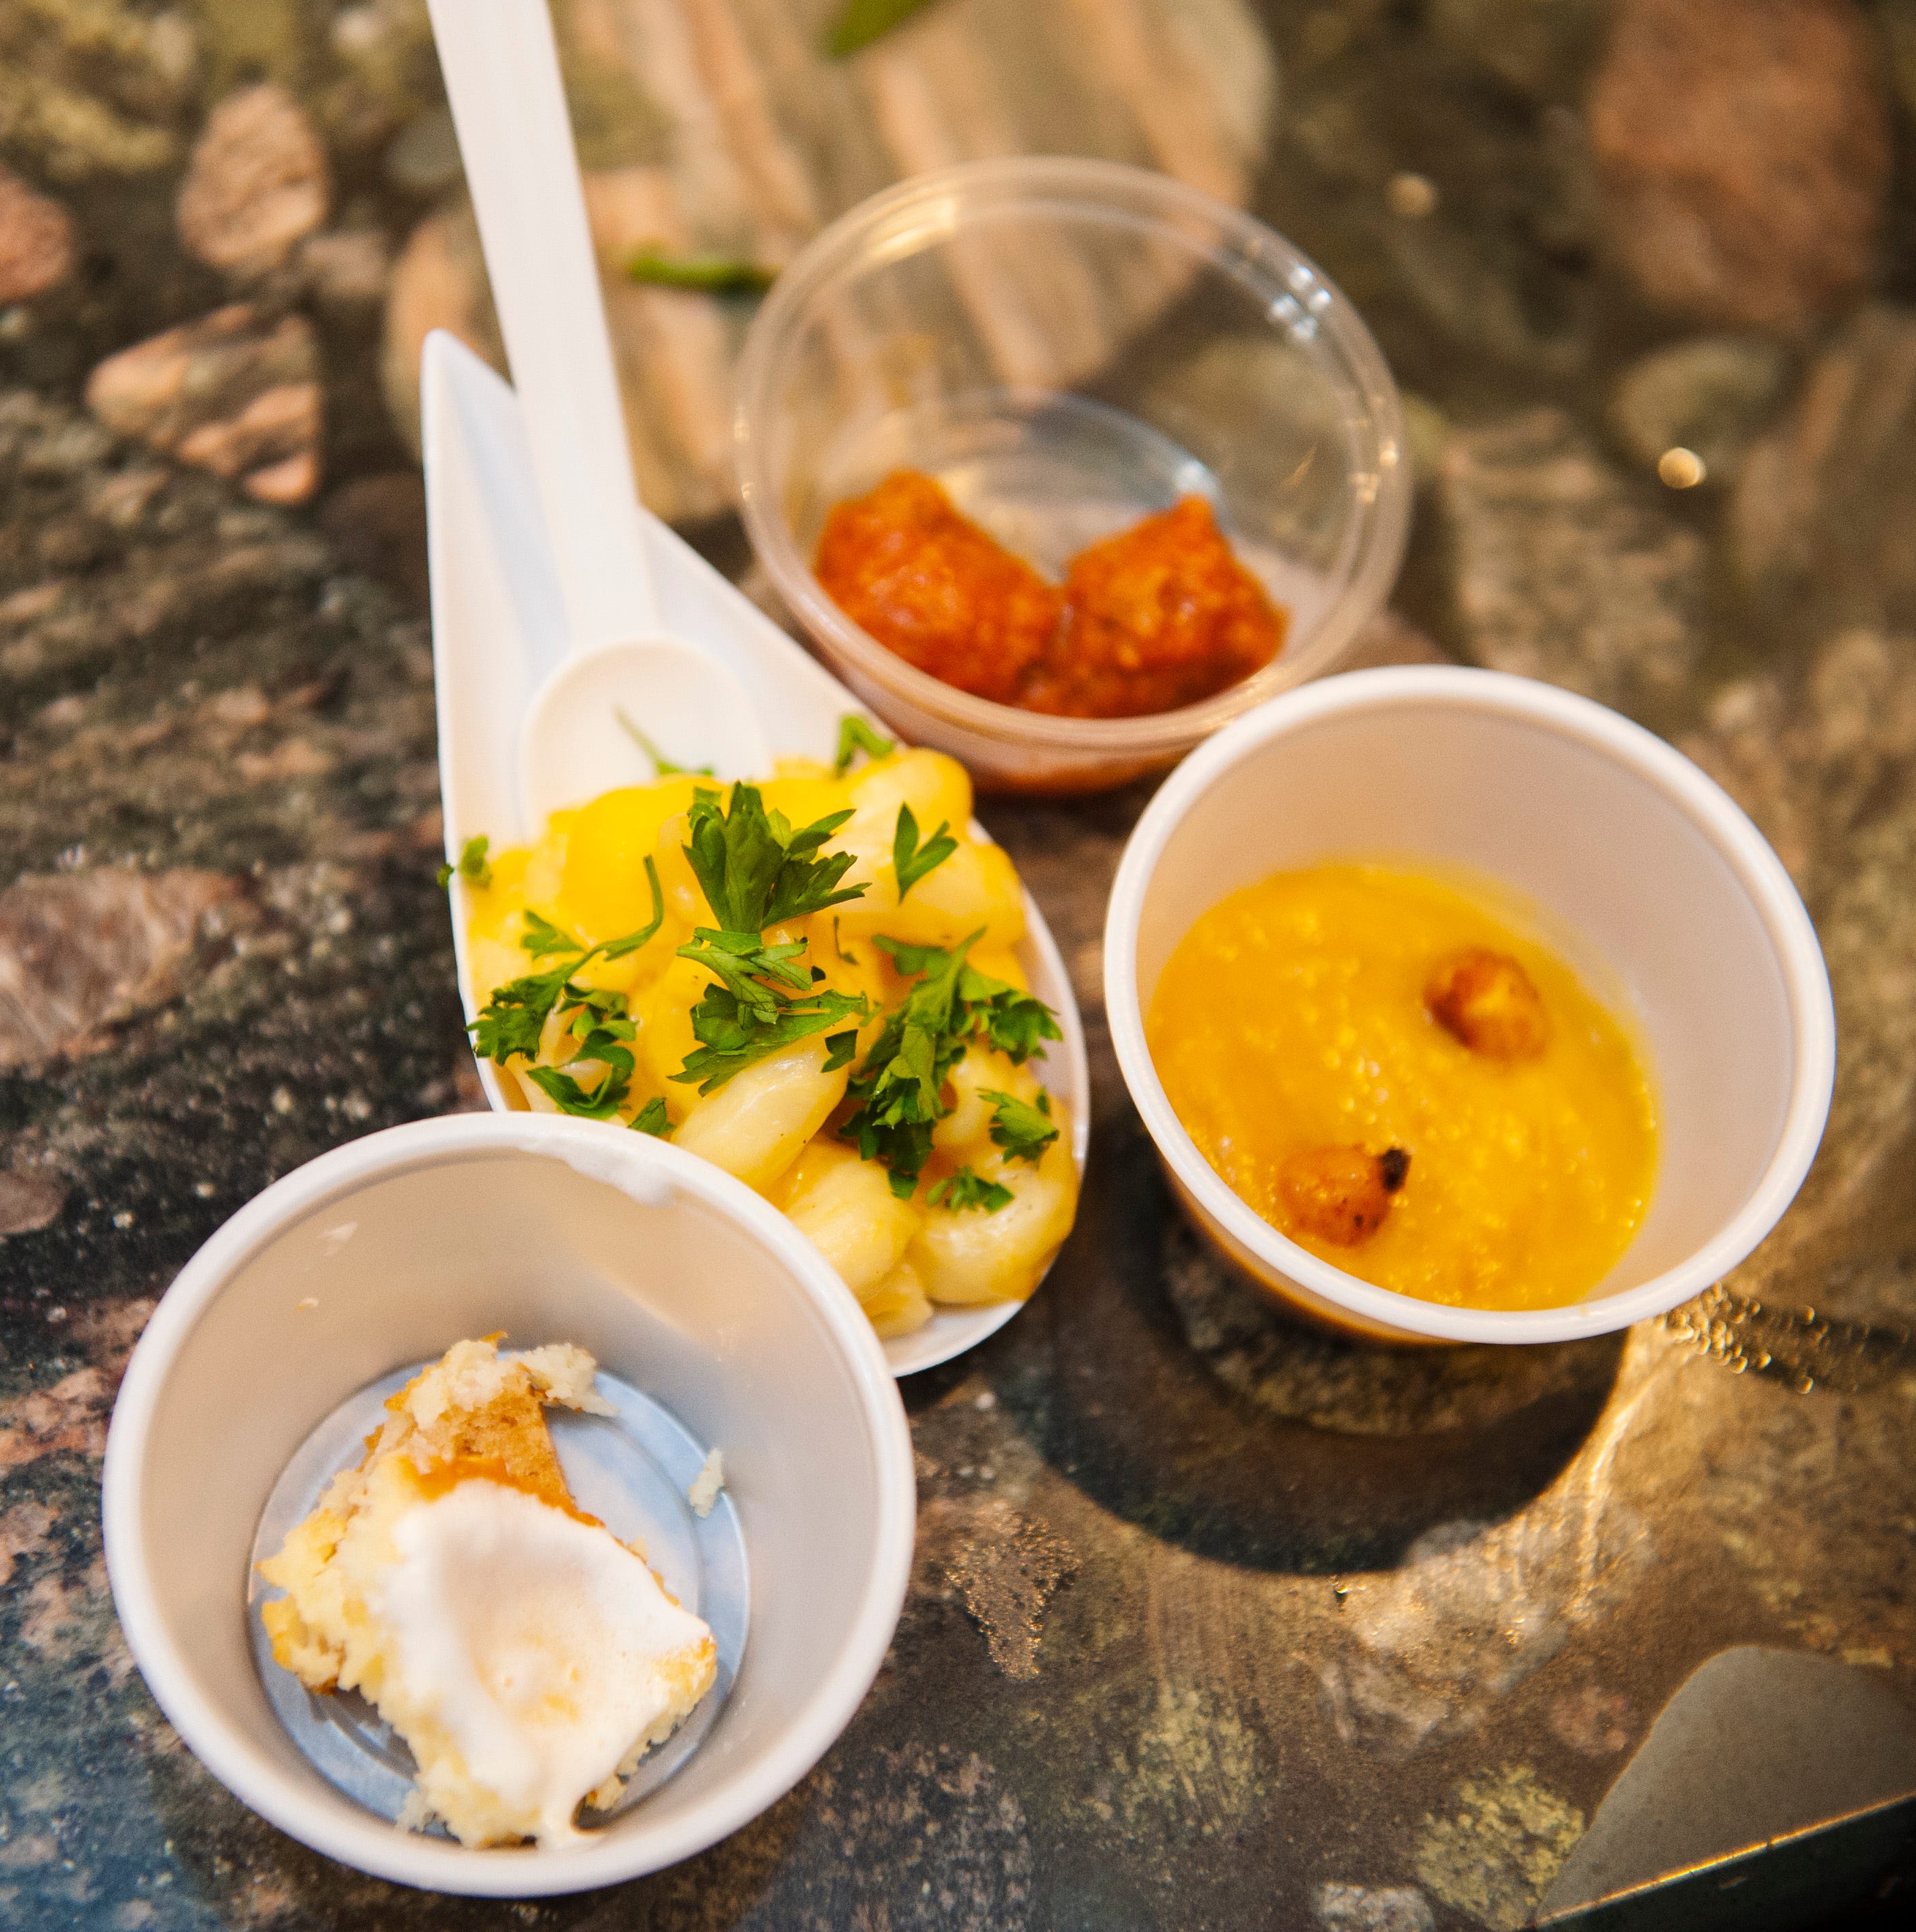 Free cannabis-infused food samples include, from left, cheesecake, macaroni and cheese, meatballs and butternut squash soup with roasted chipotle chick peas.